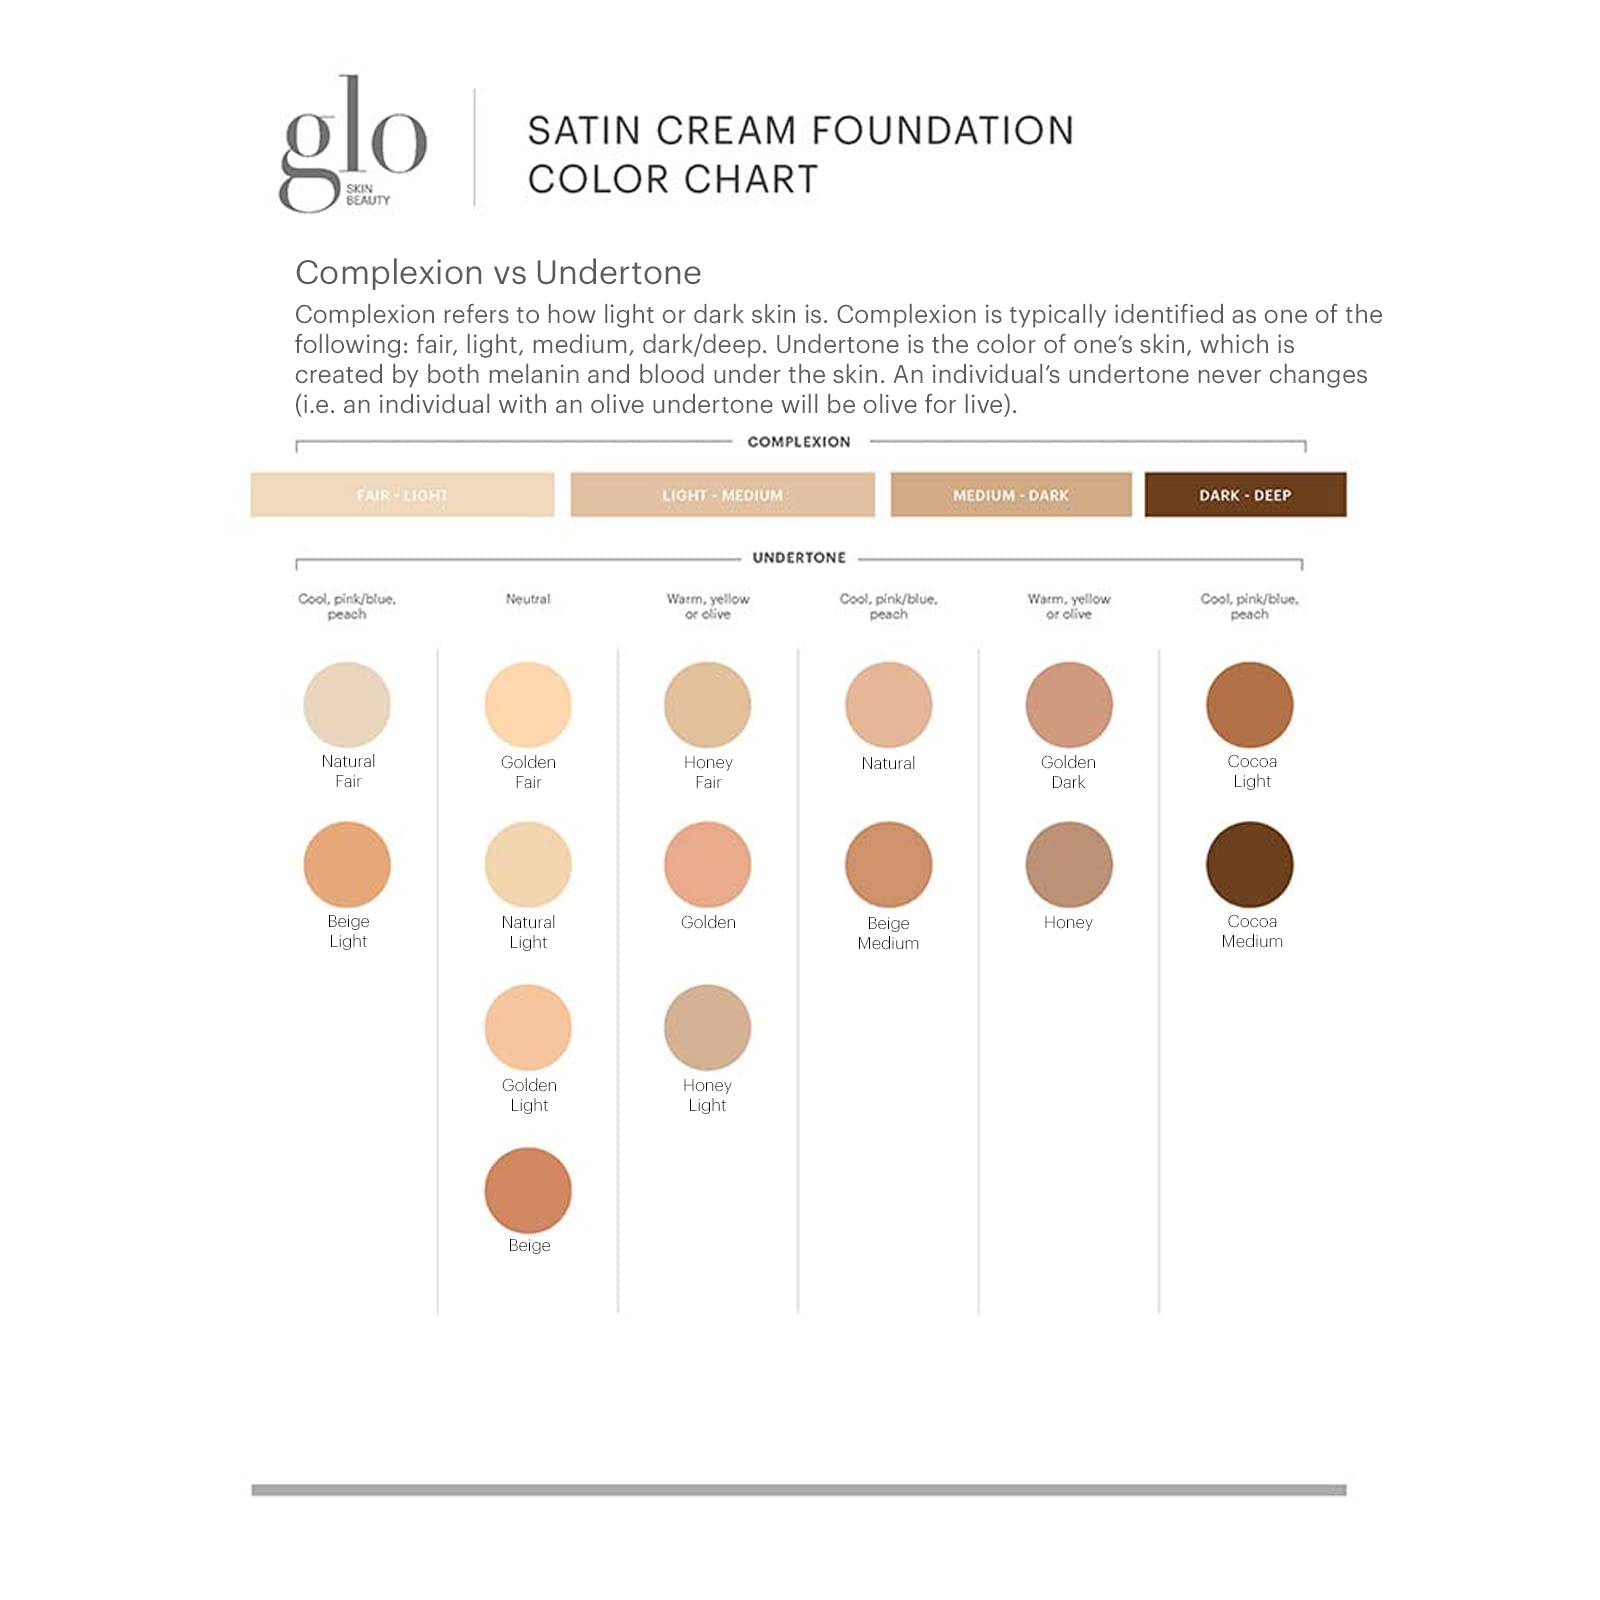 Glo Skin Beauty Satin Cream Foundation Makeup for Face, Natural Light - Full Coverage, Semi Matte Finish, Conceal Blemishes & Even Skin Tone